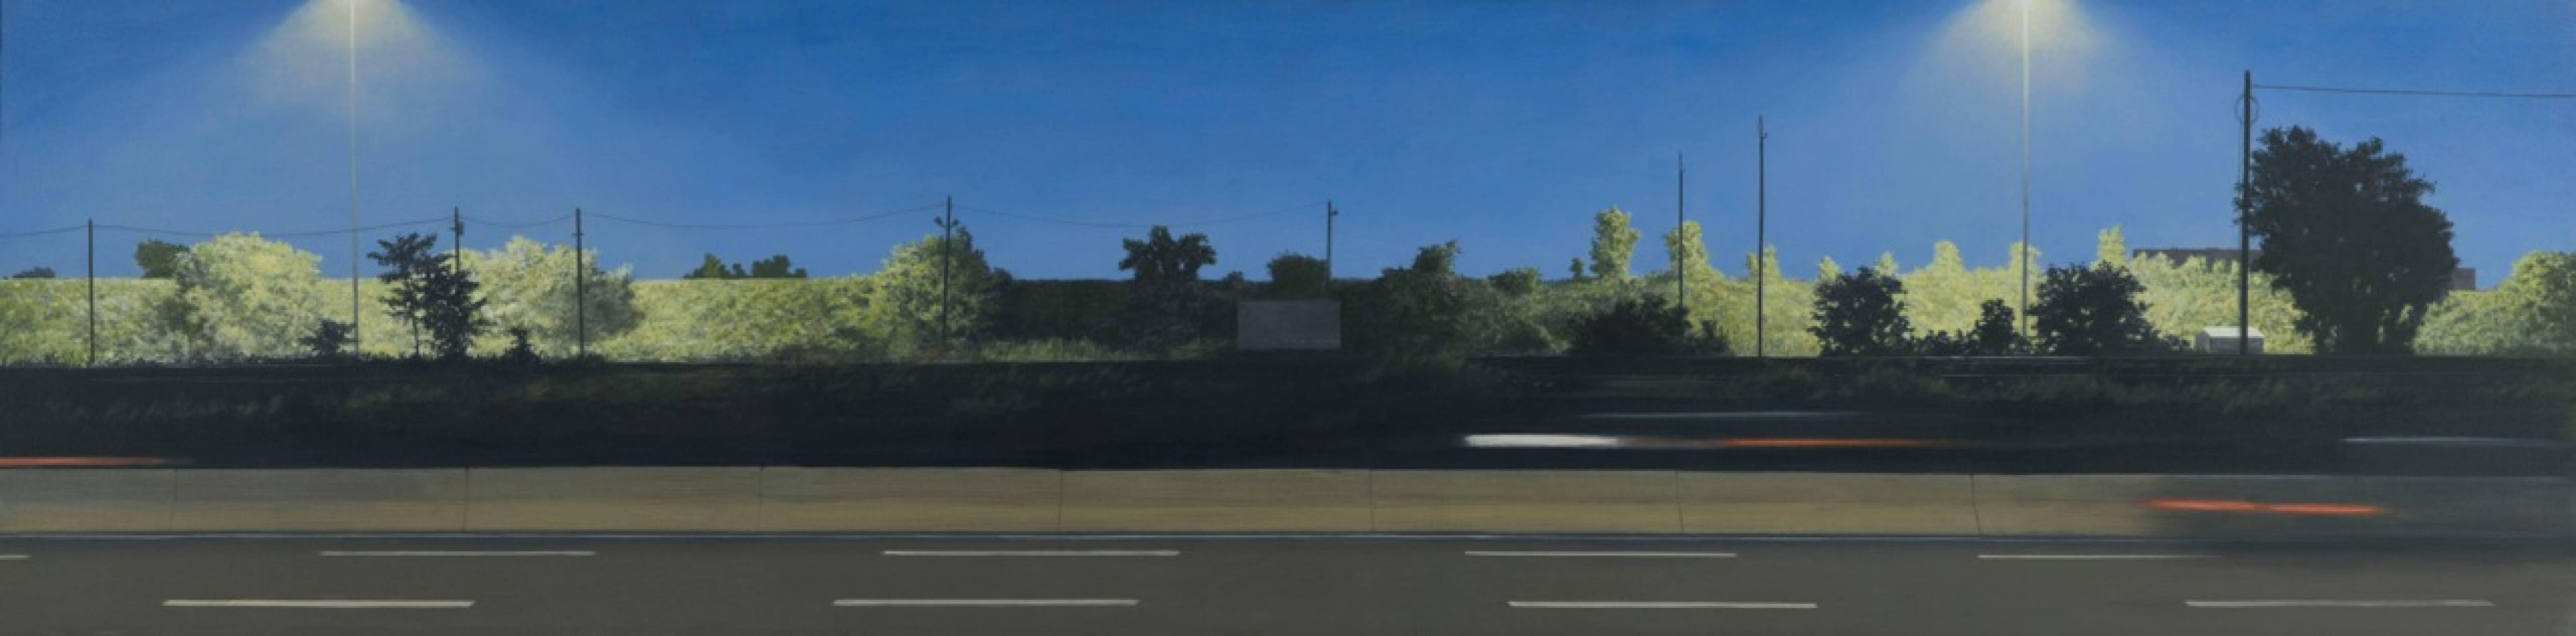 Tim Daly Landscape Painting - Route 280W, East Newark